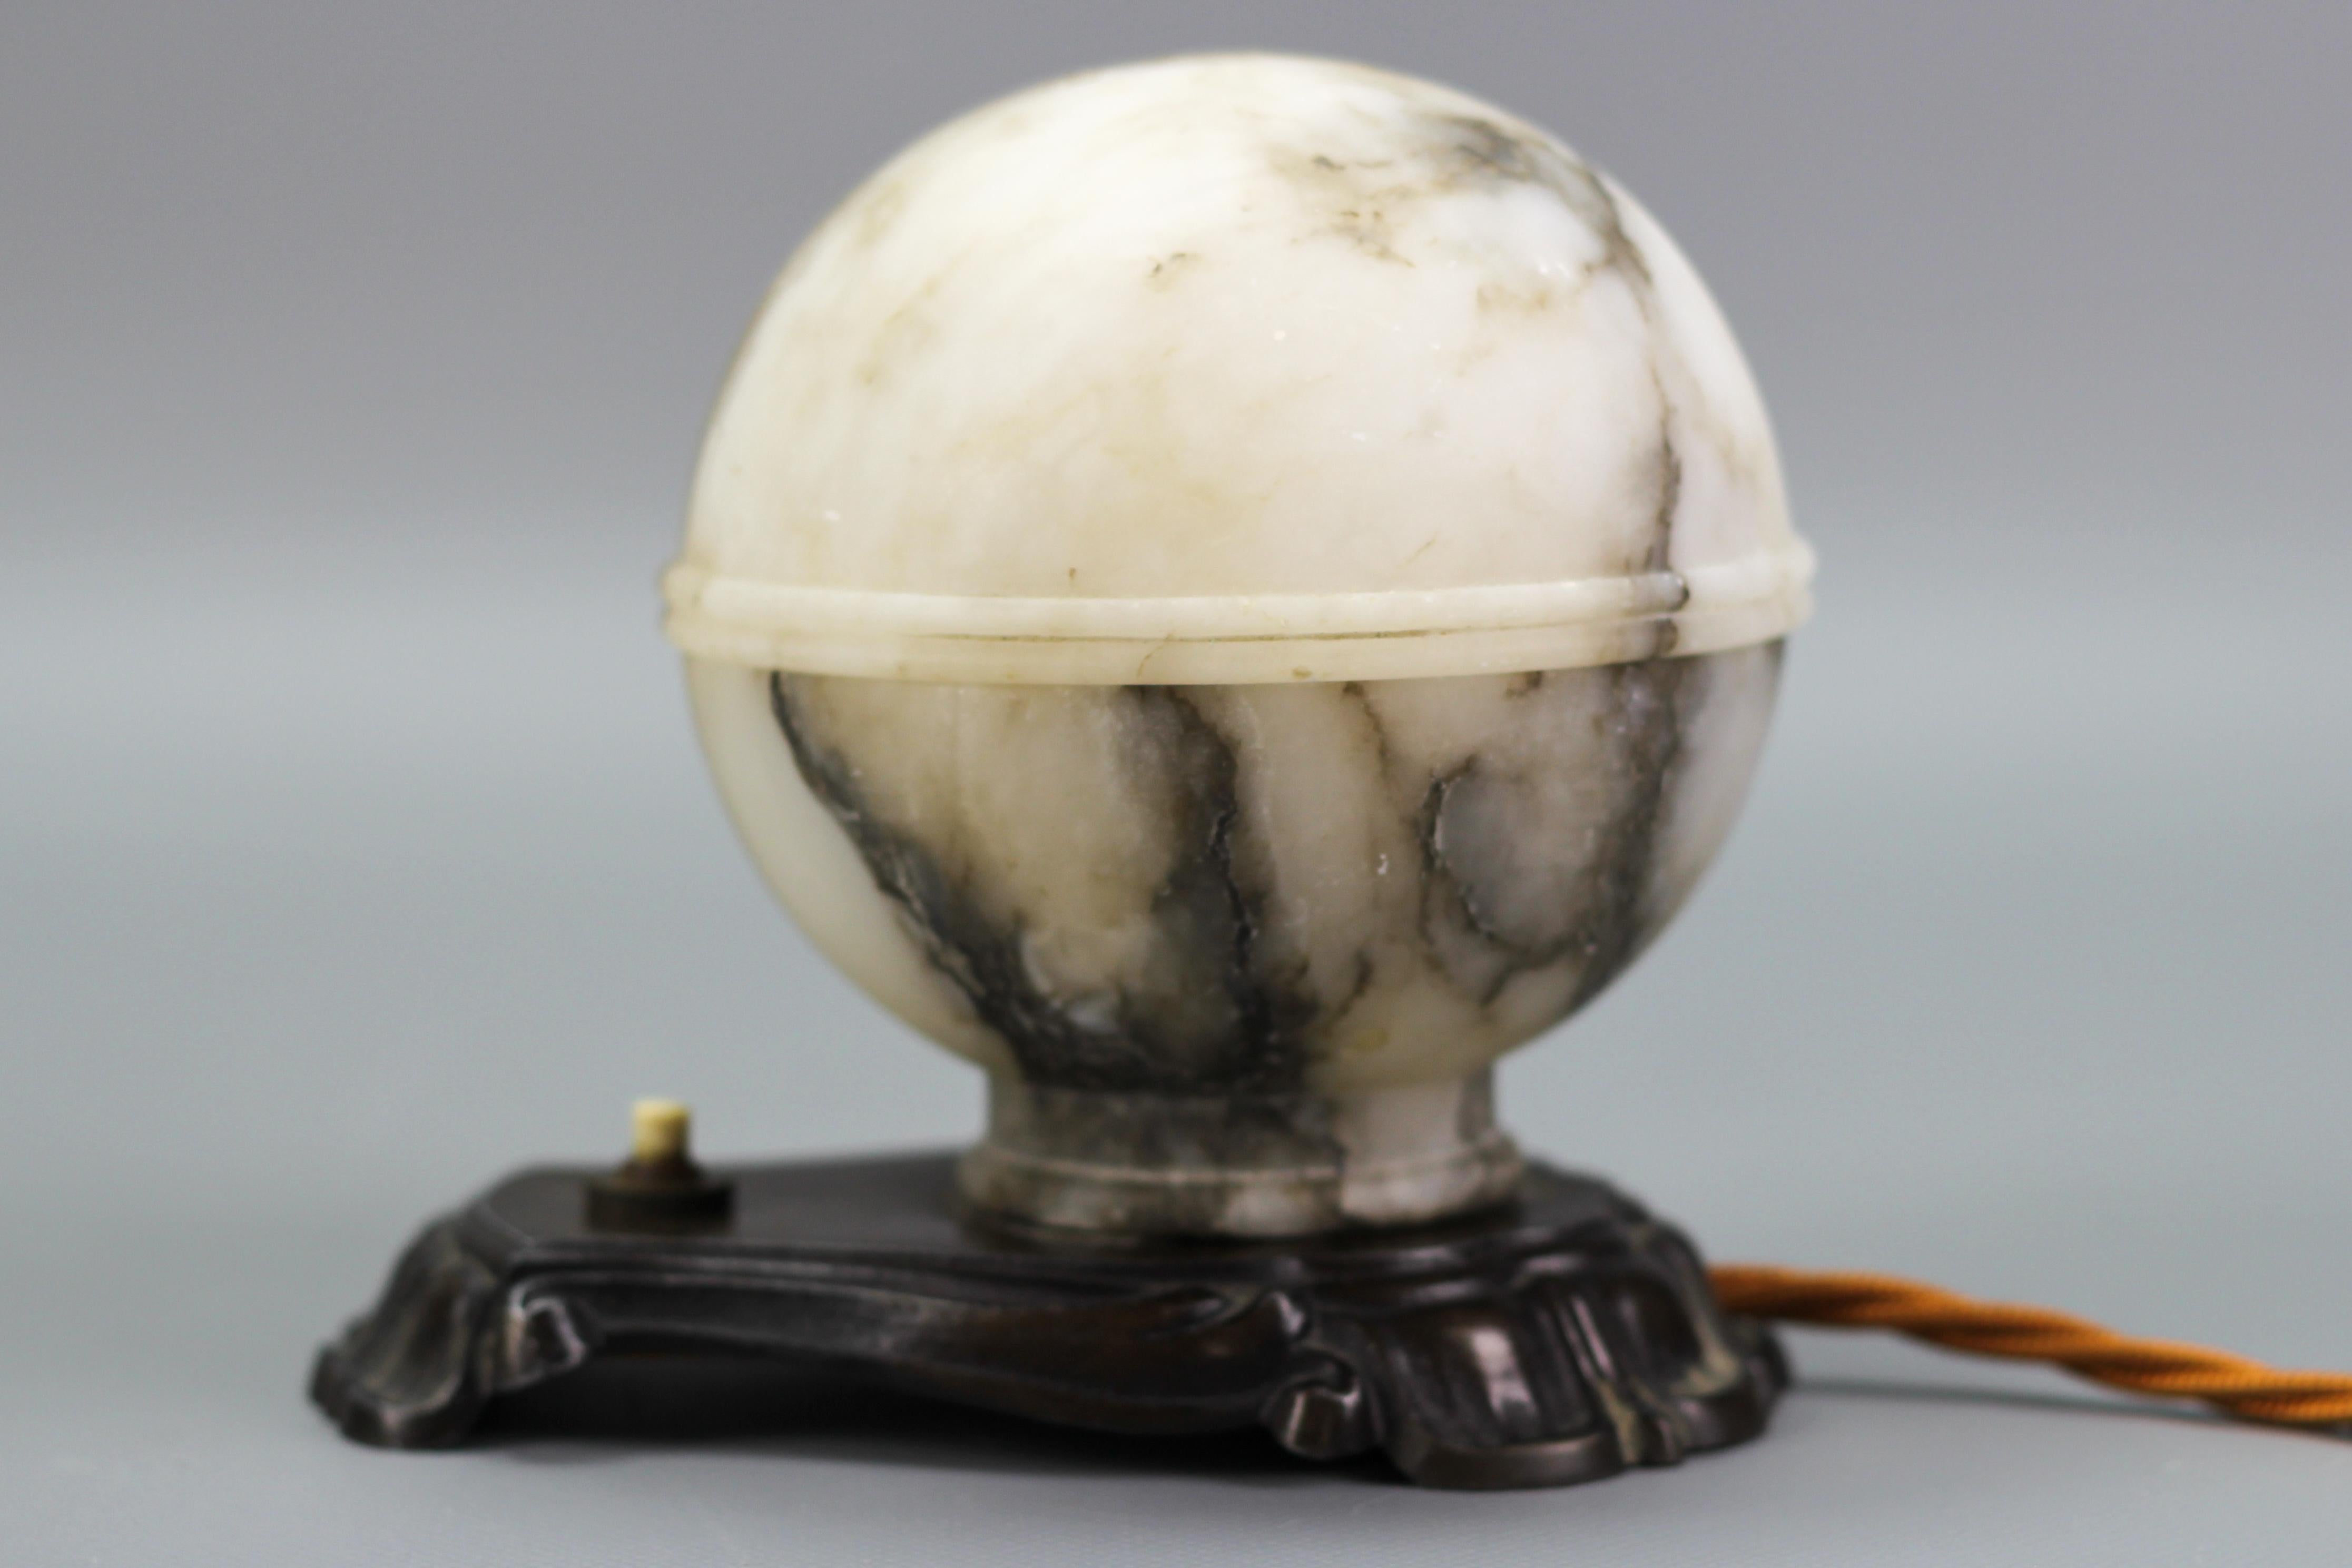 Art Deco White and Black Alabaster Globe Sphere Night Lamp or Mood Lamp, 1930s For Sale 4